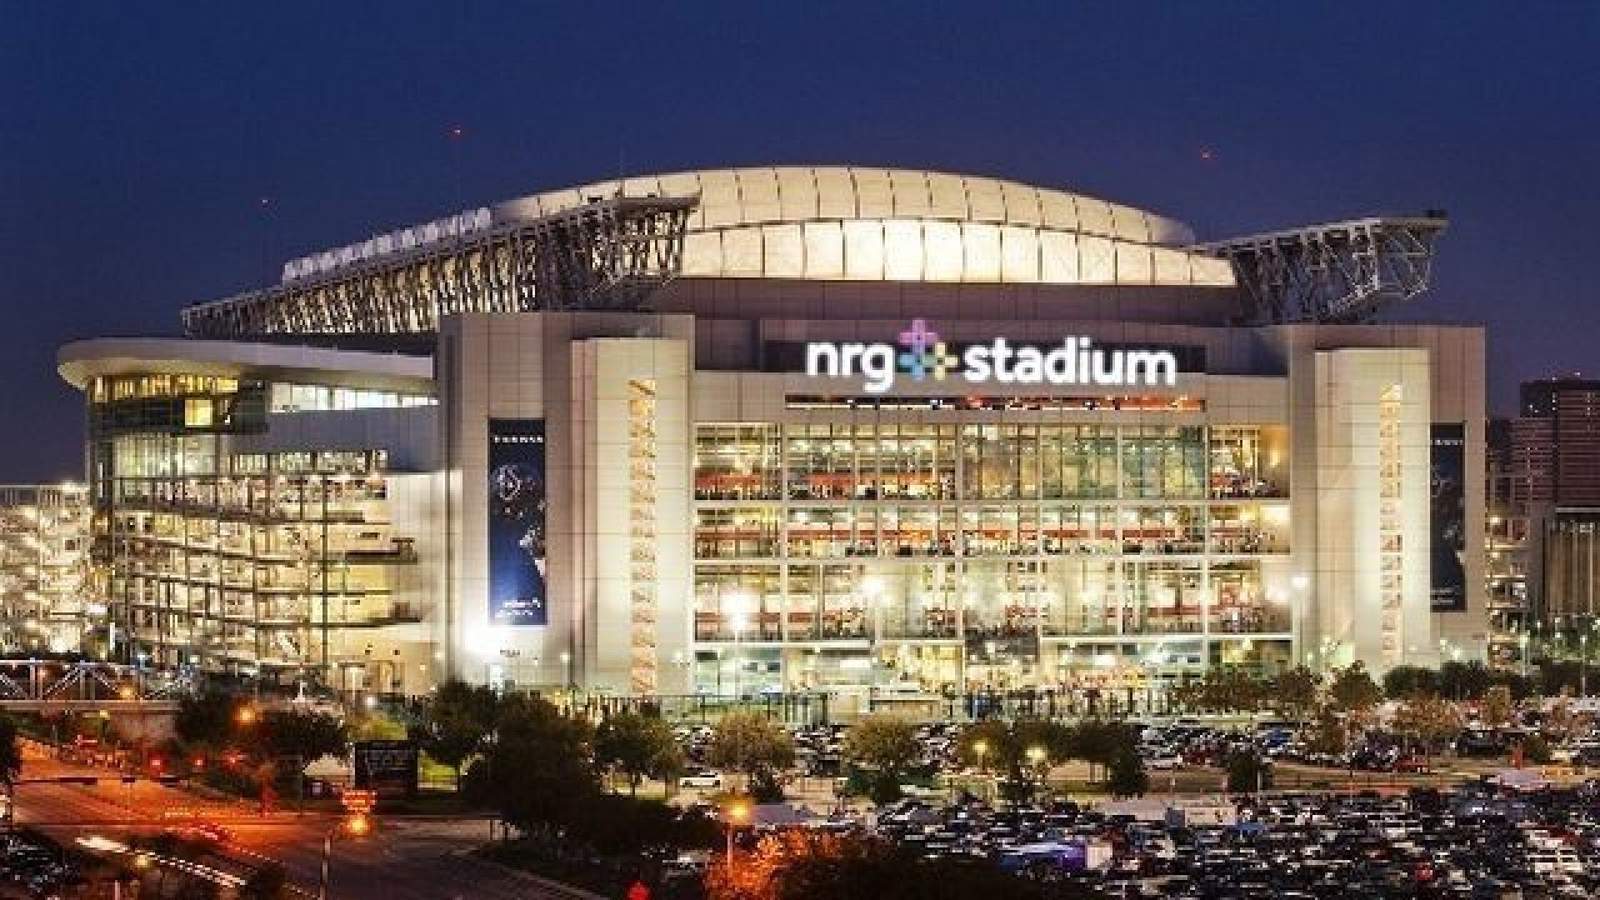 Ask 2: I live in Harris County. Do I have to go to NRG Stadium to drop off my ballot?